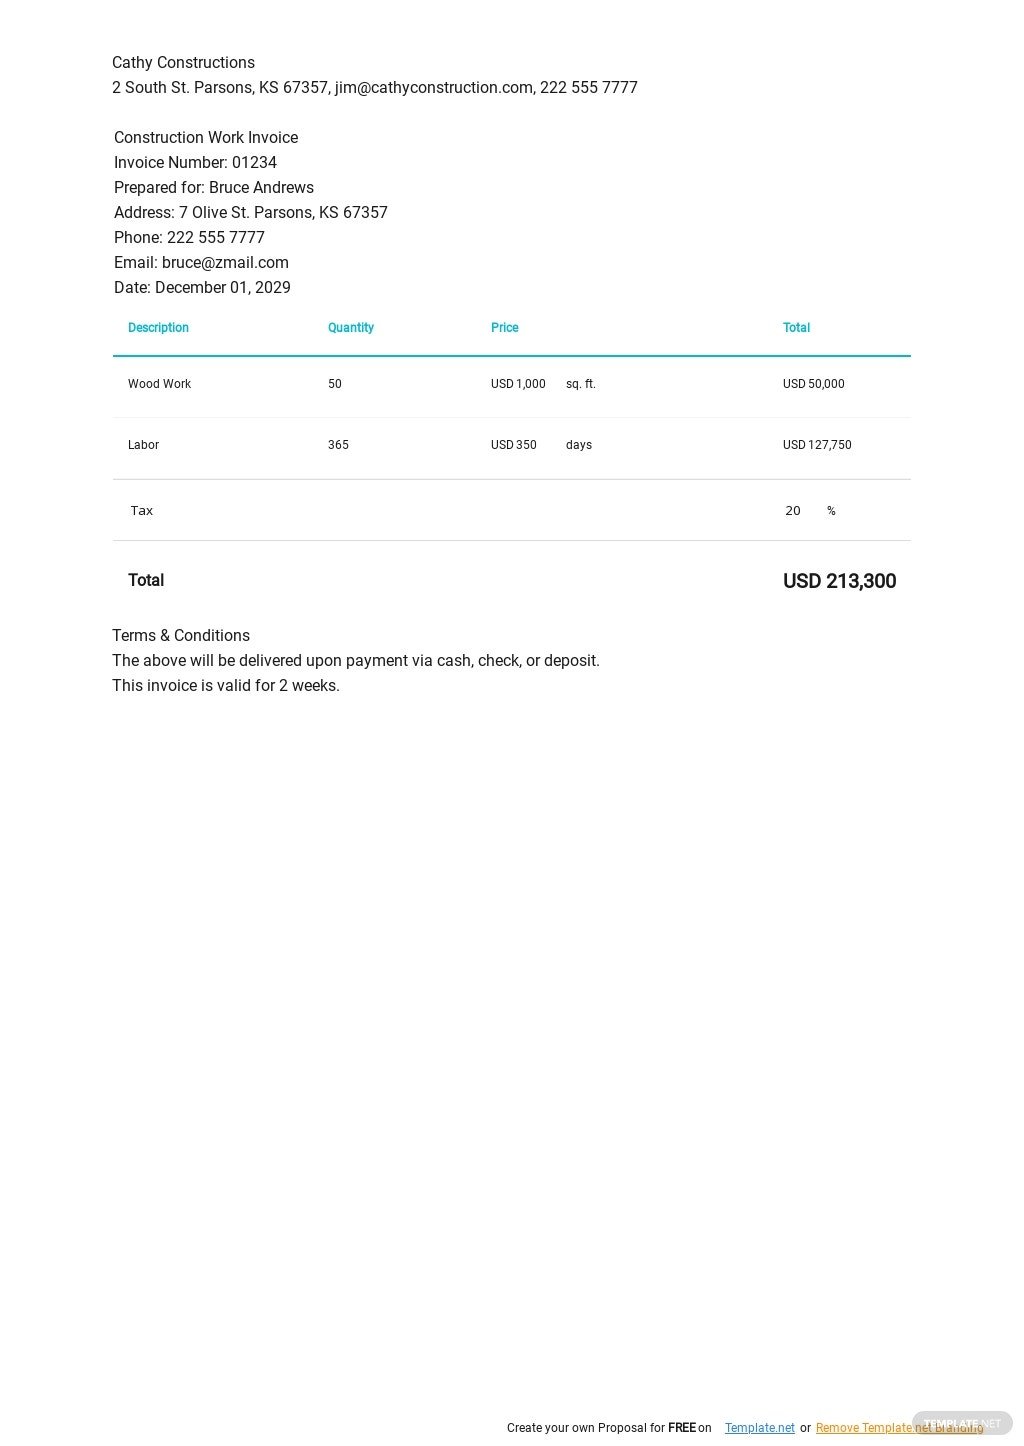 construction work invoice template